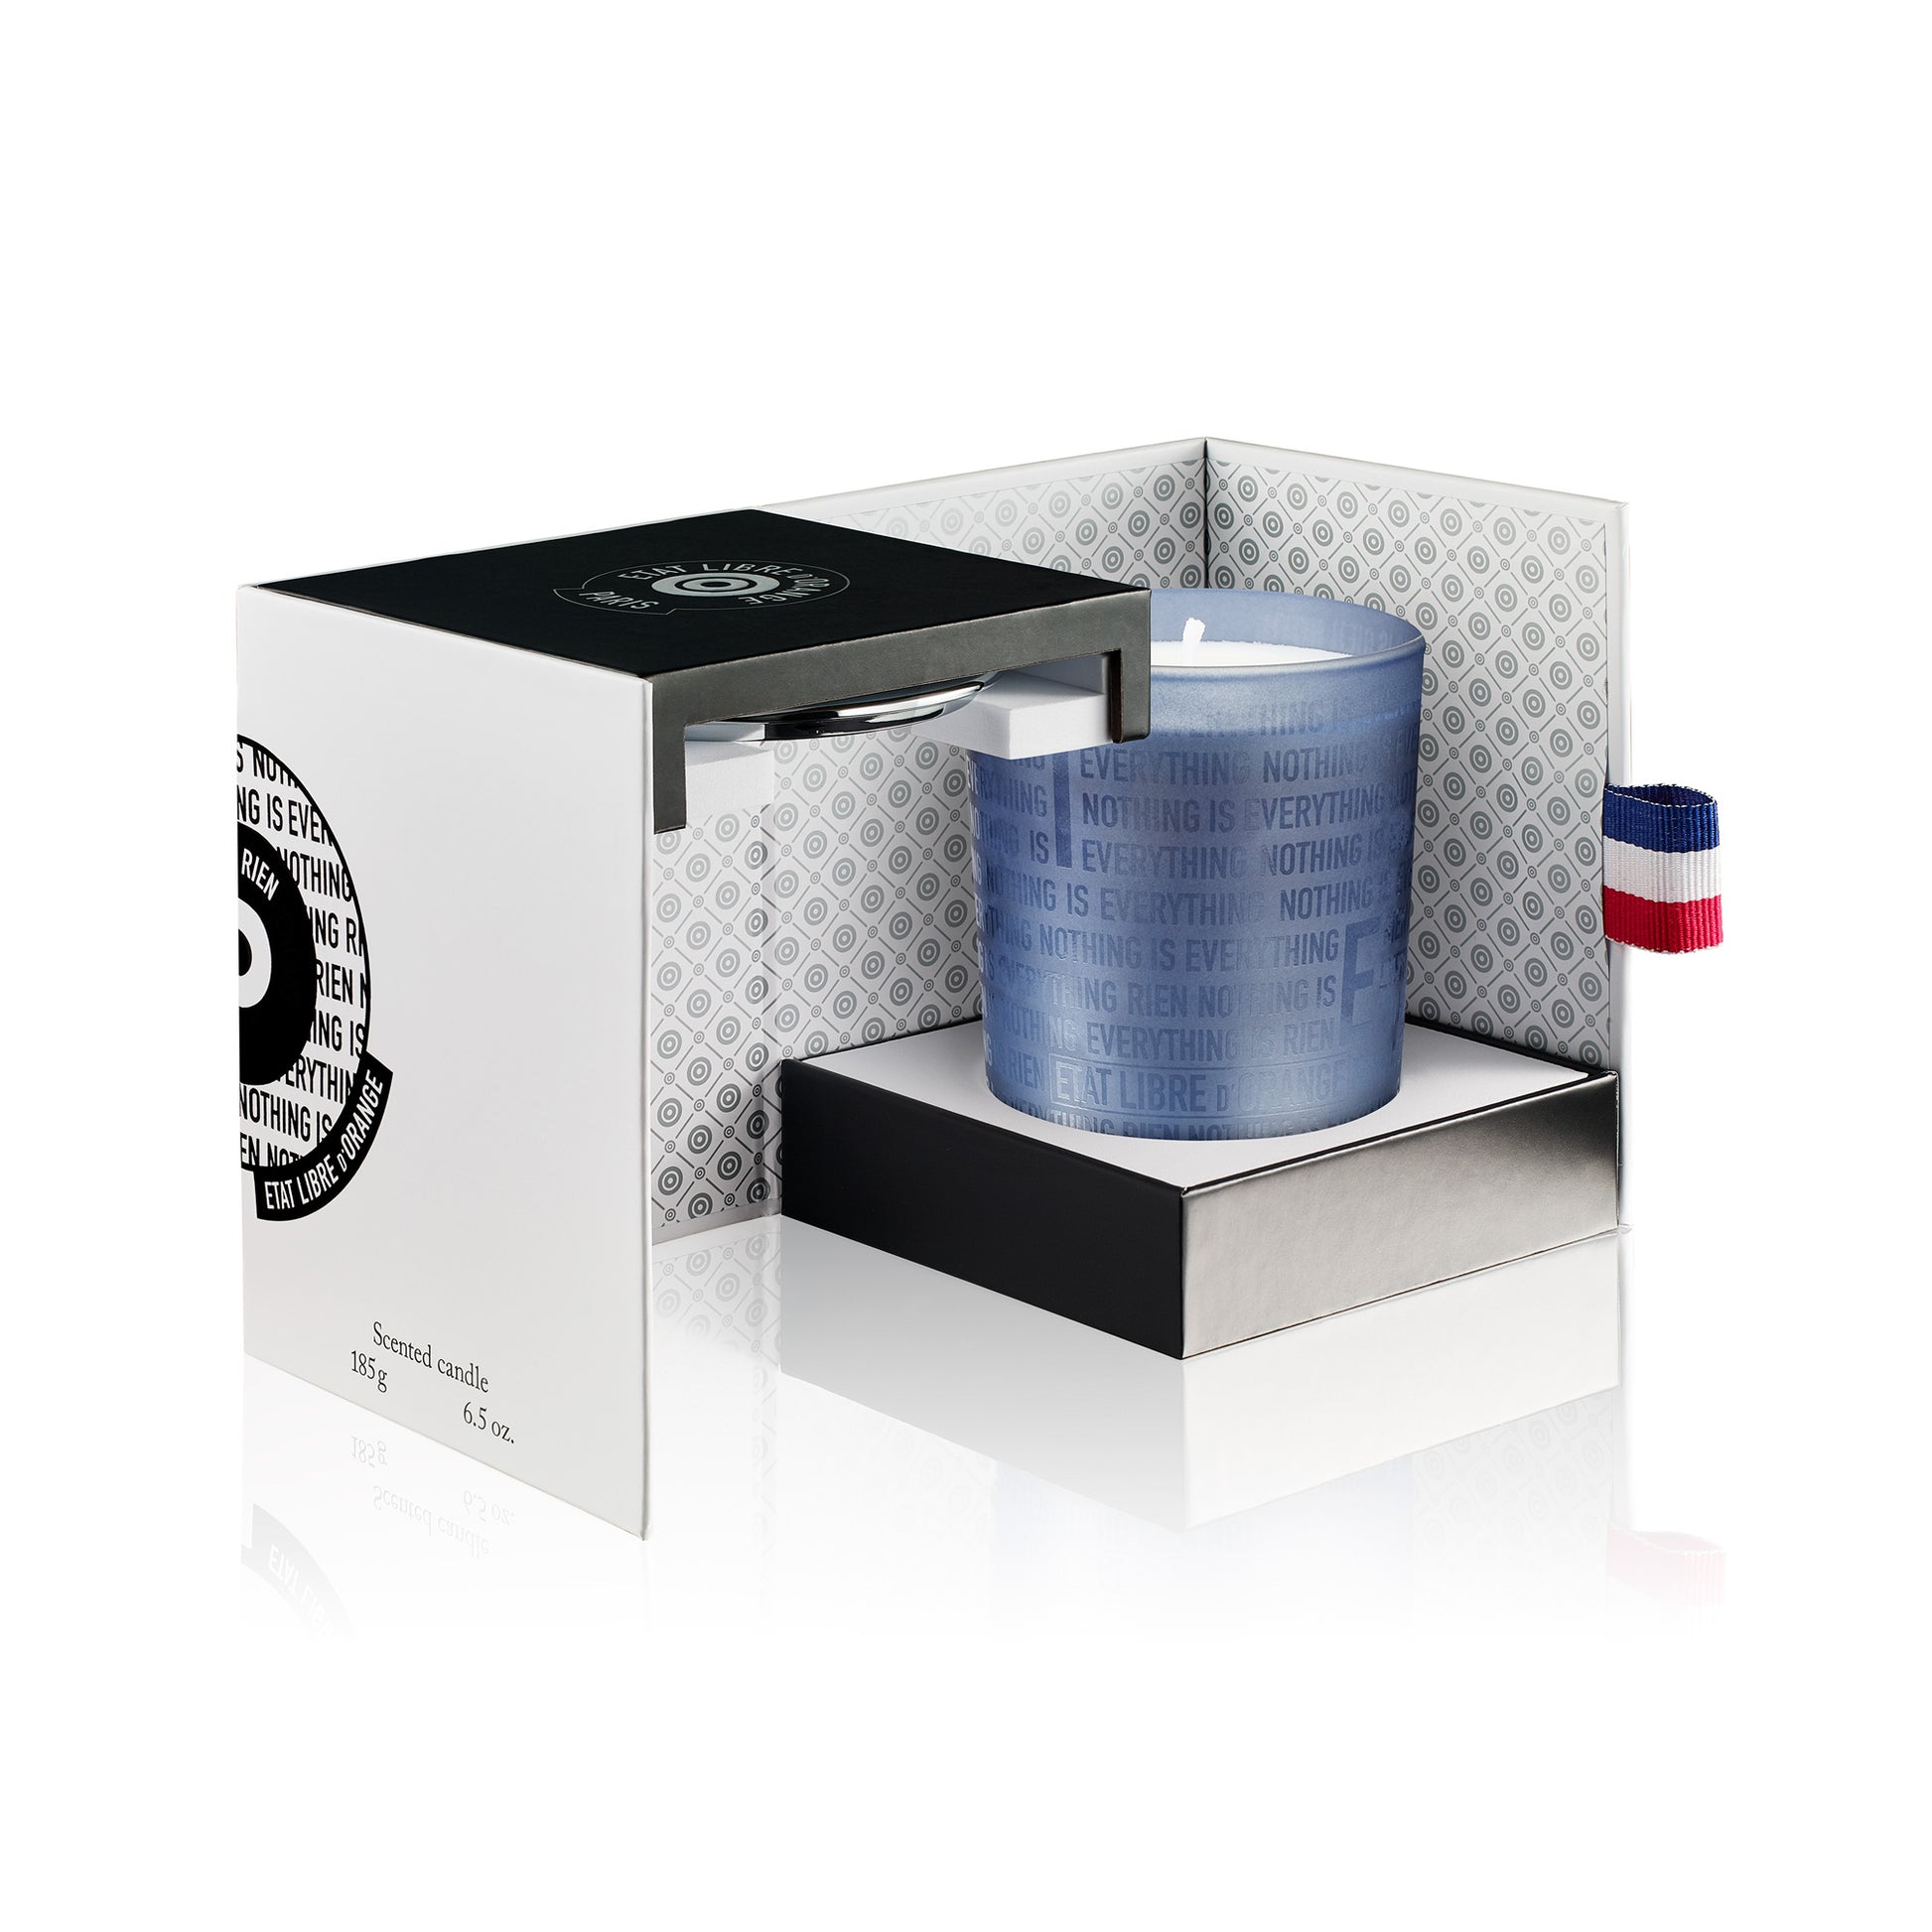 Rien - Scented Candle - Opened Box and candle